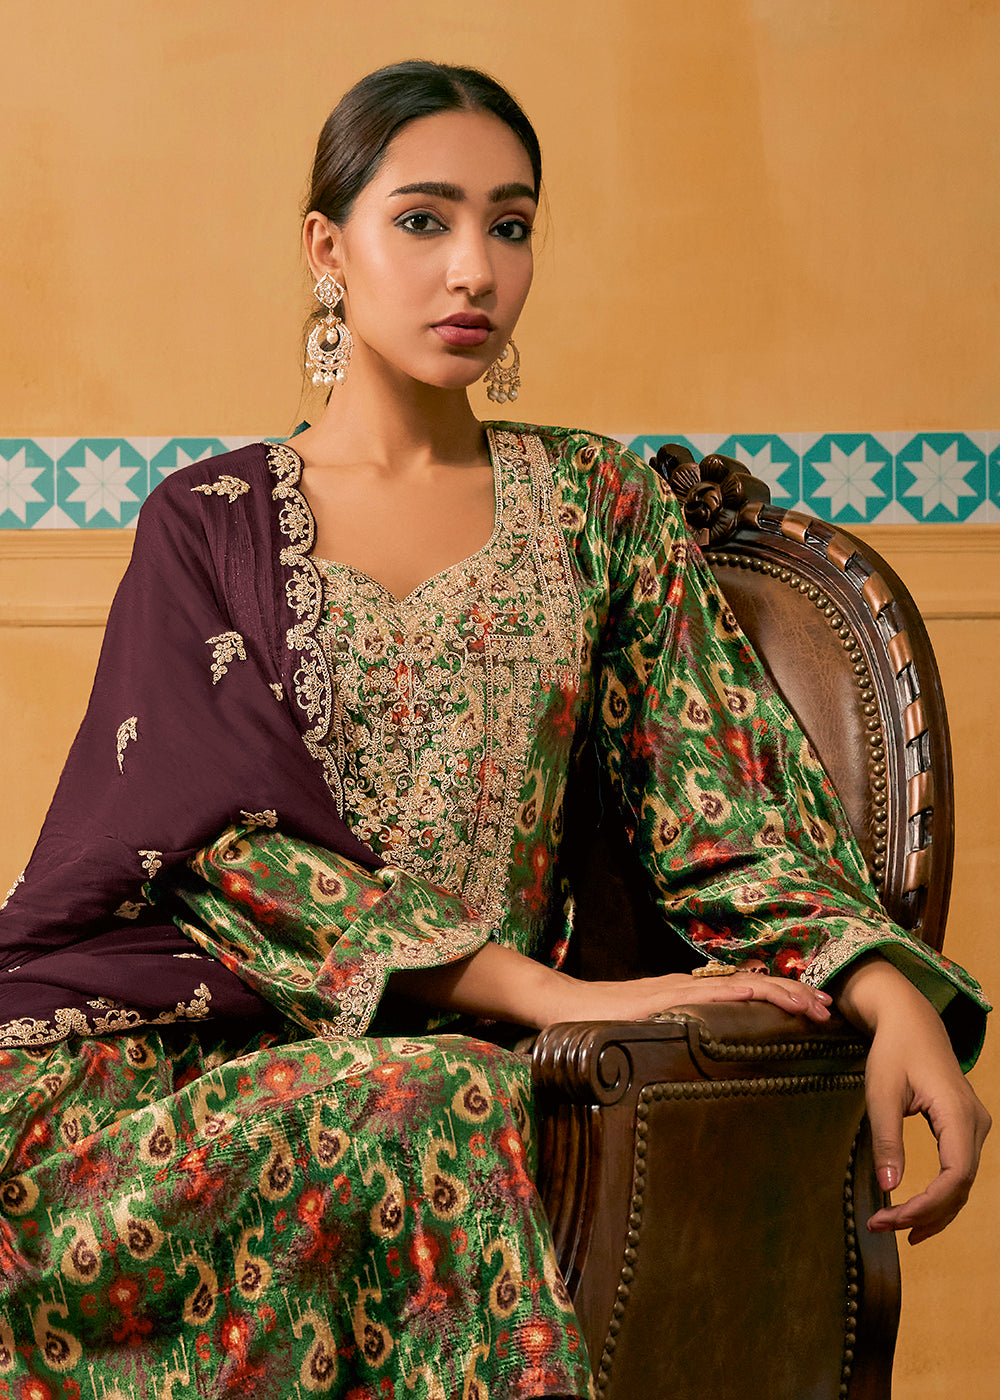 Buy Now Green Multicolor Digital Printed Embroidered Velvet Salwar Suit Online in USA, UK, Canada, Germany, Australia & Worldwide at Empress Clothing.